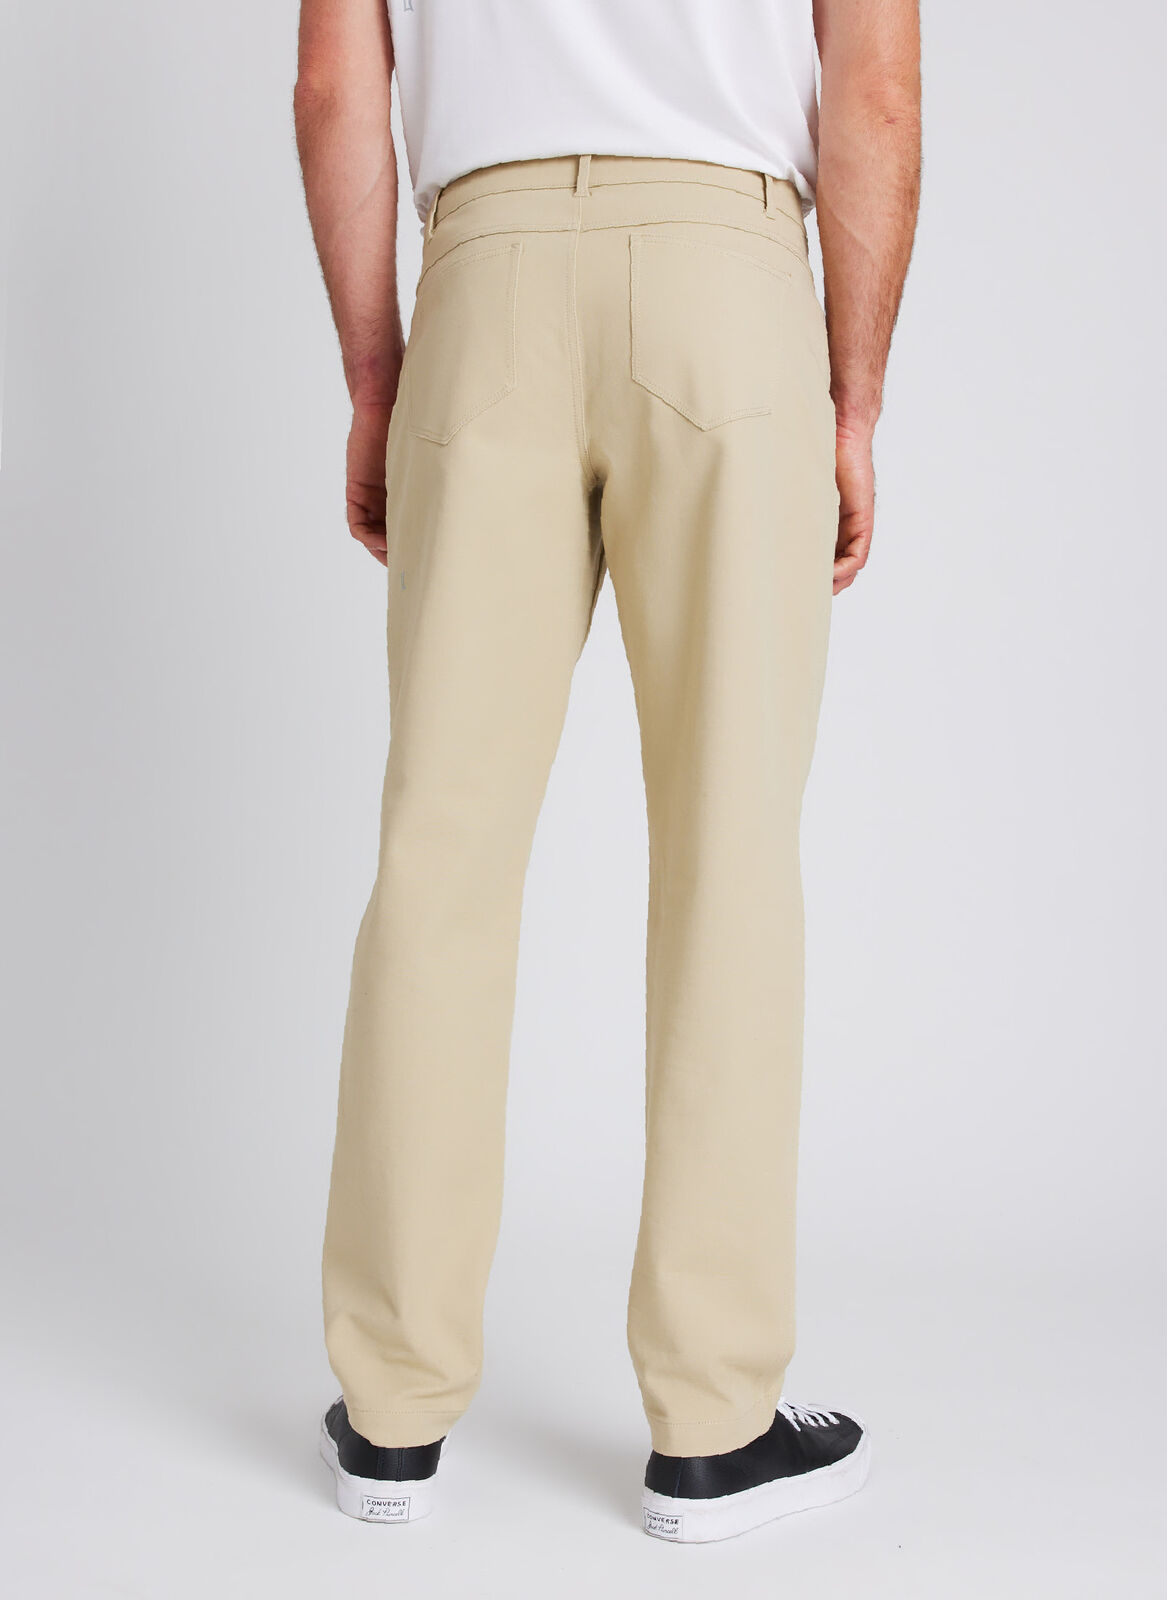 SUV 5 Pocket Pants Relaxed Fit ?? Model:: Ronan | 32 || Sand Dune